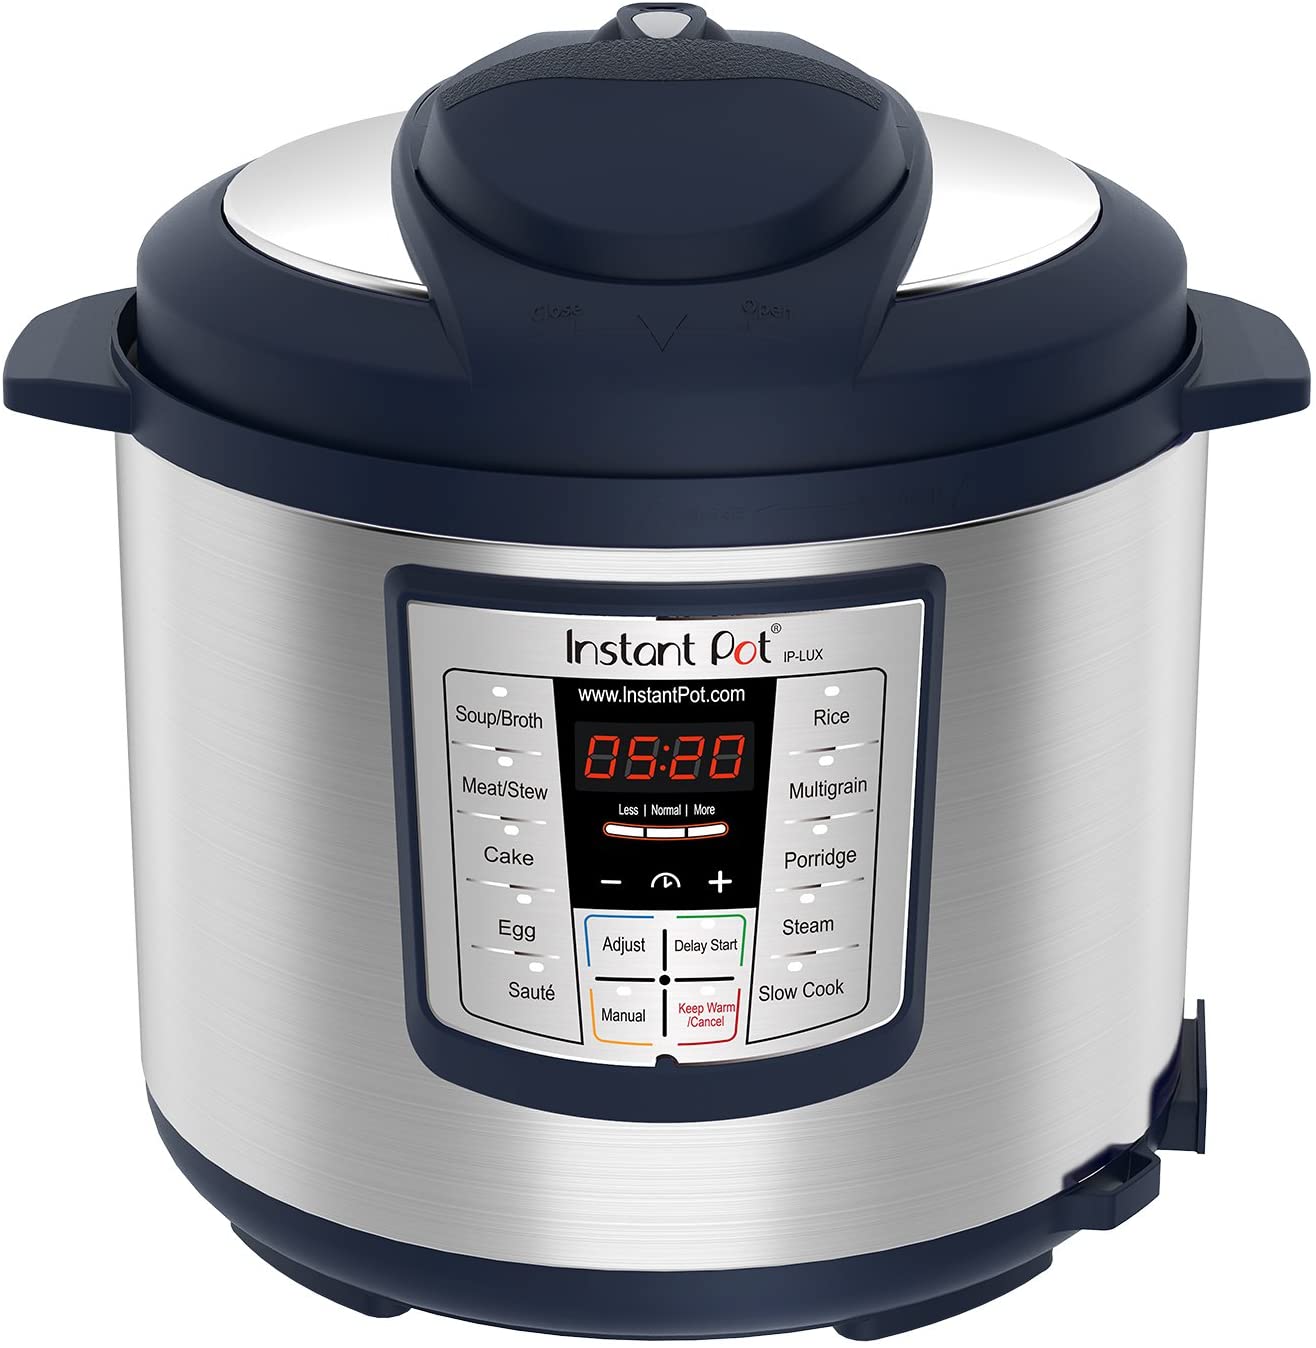 Instant Pot Lux 6-in-1 Electric Pressure Cooker, Slow Cooker, Rice Cooker, Steamer, Saute, and Warmer|6 Quart|Navy|12 One-Touch Programs